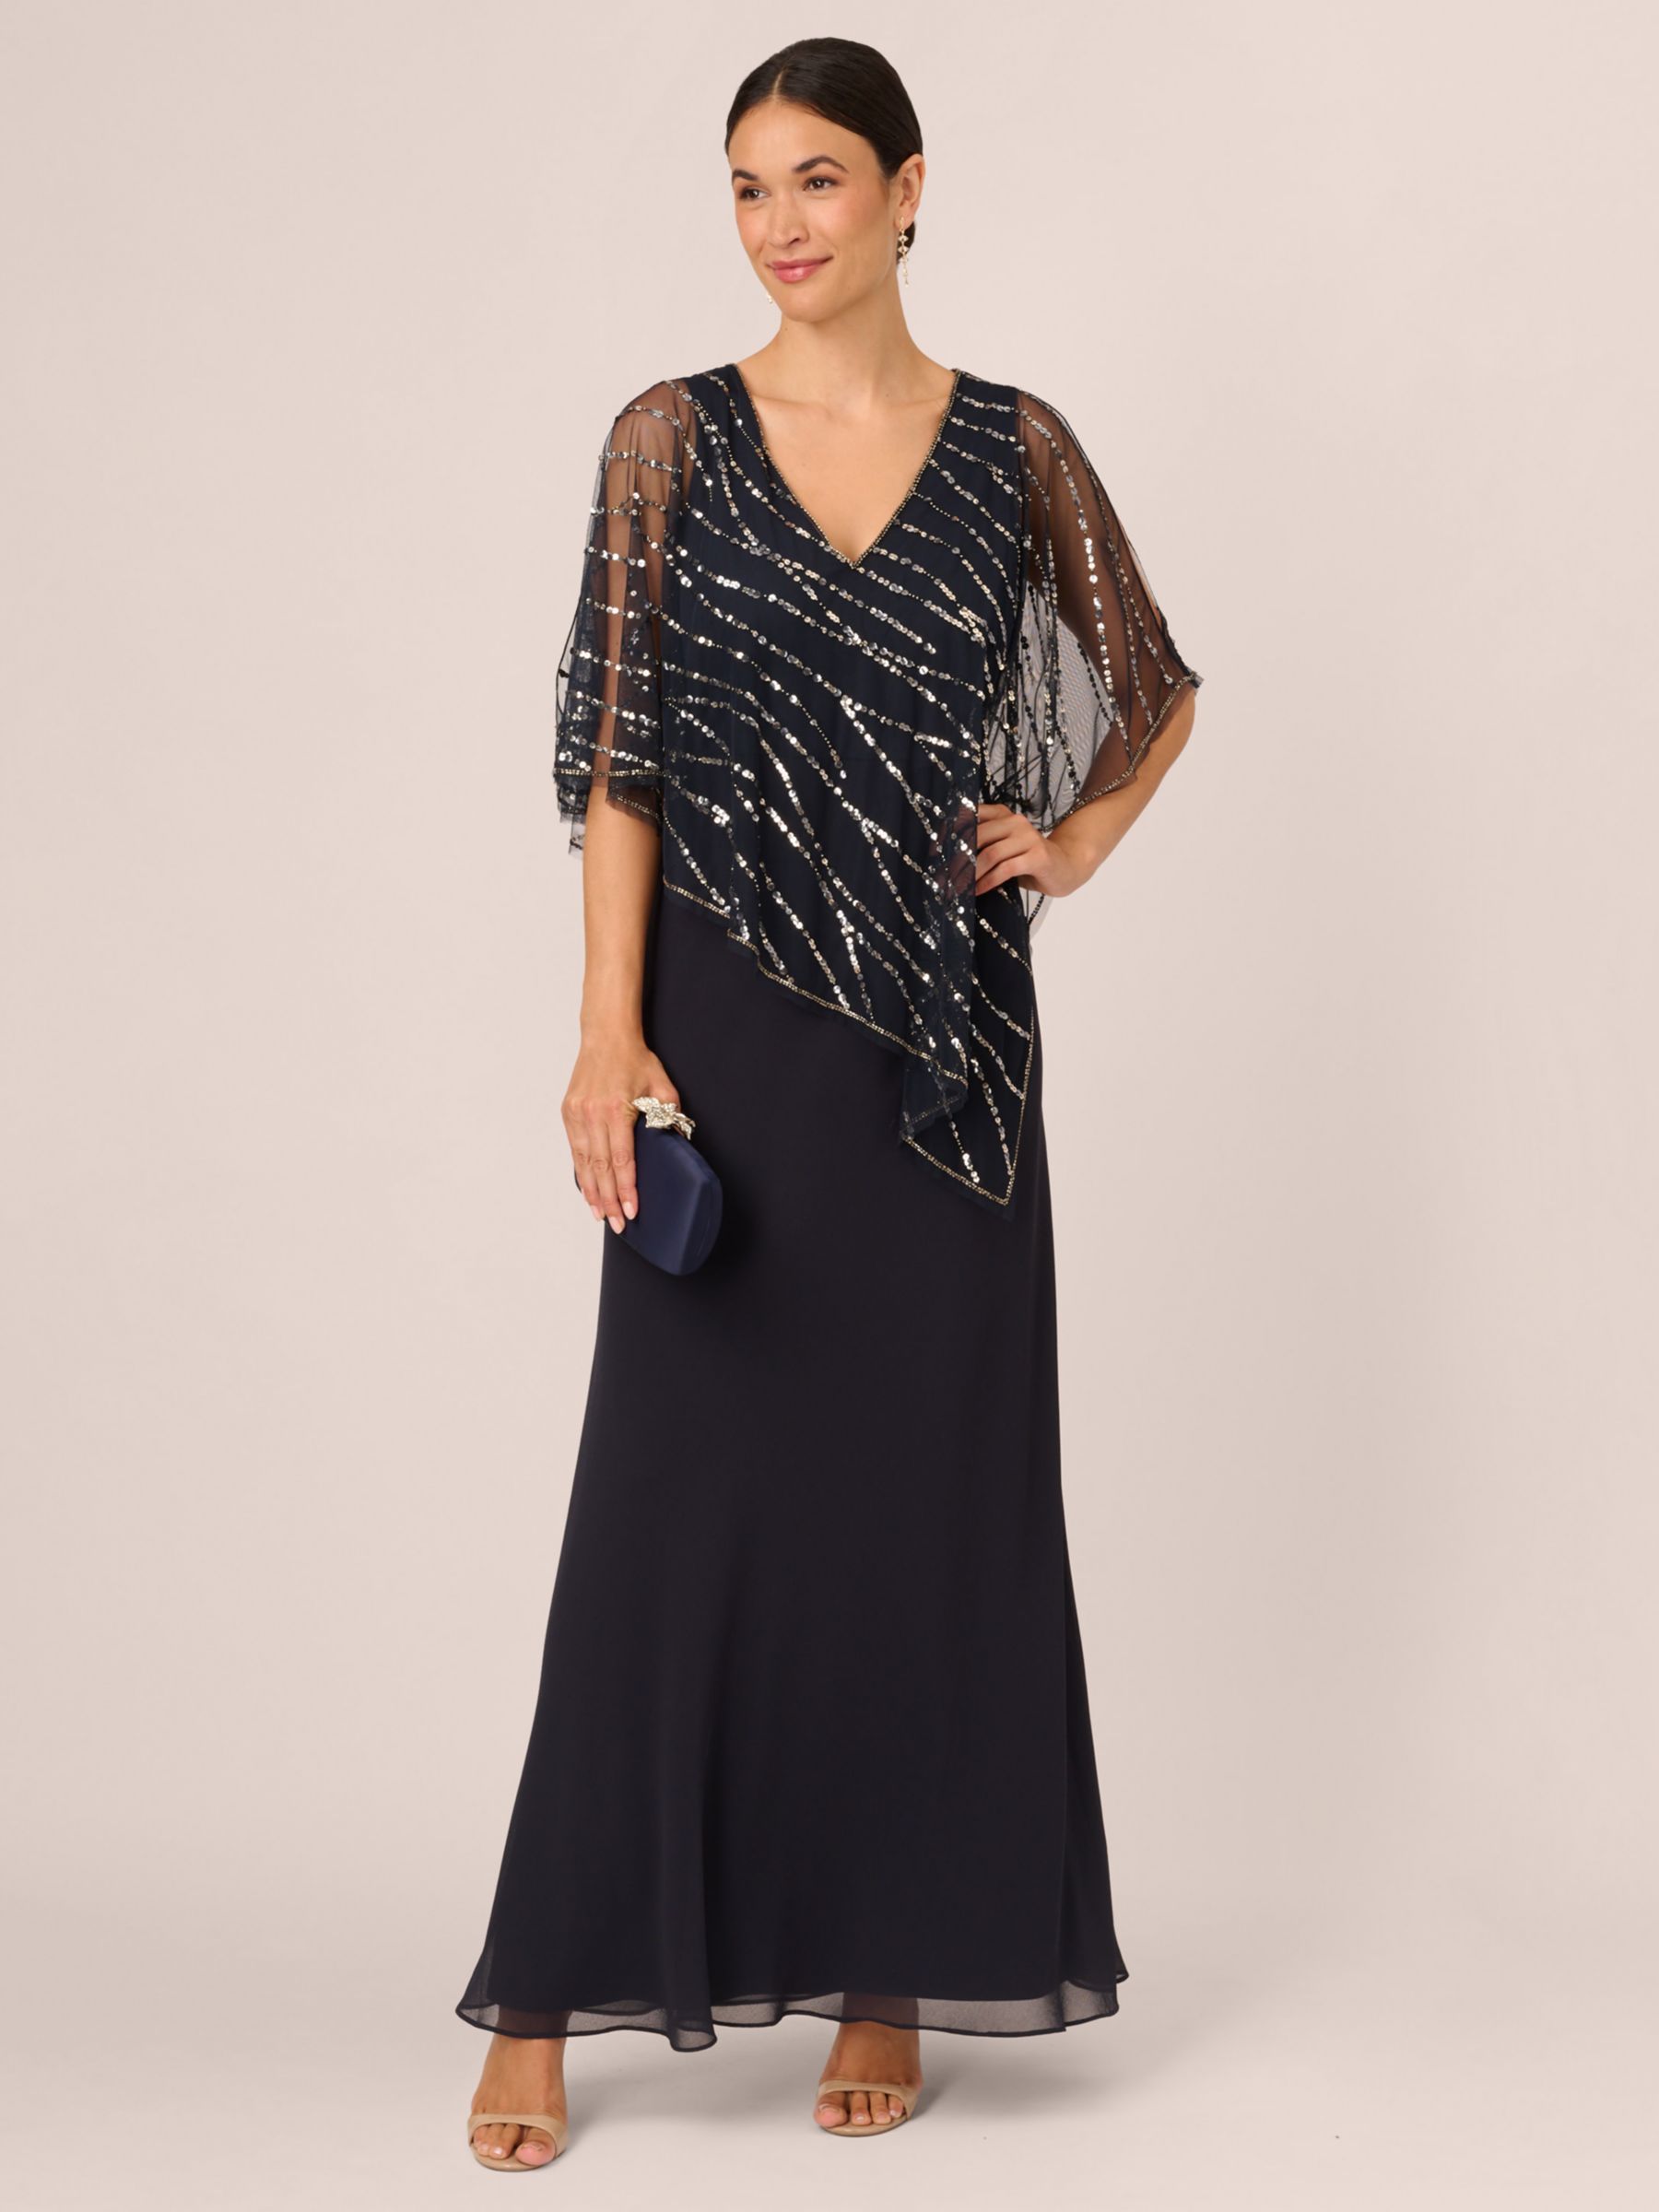 Buy Adrianna Papell Beaded Popover Dress, Midnight Online at johnlewis.com